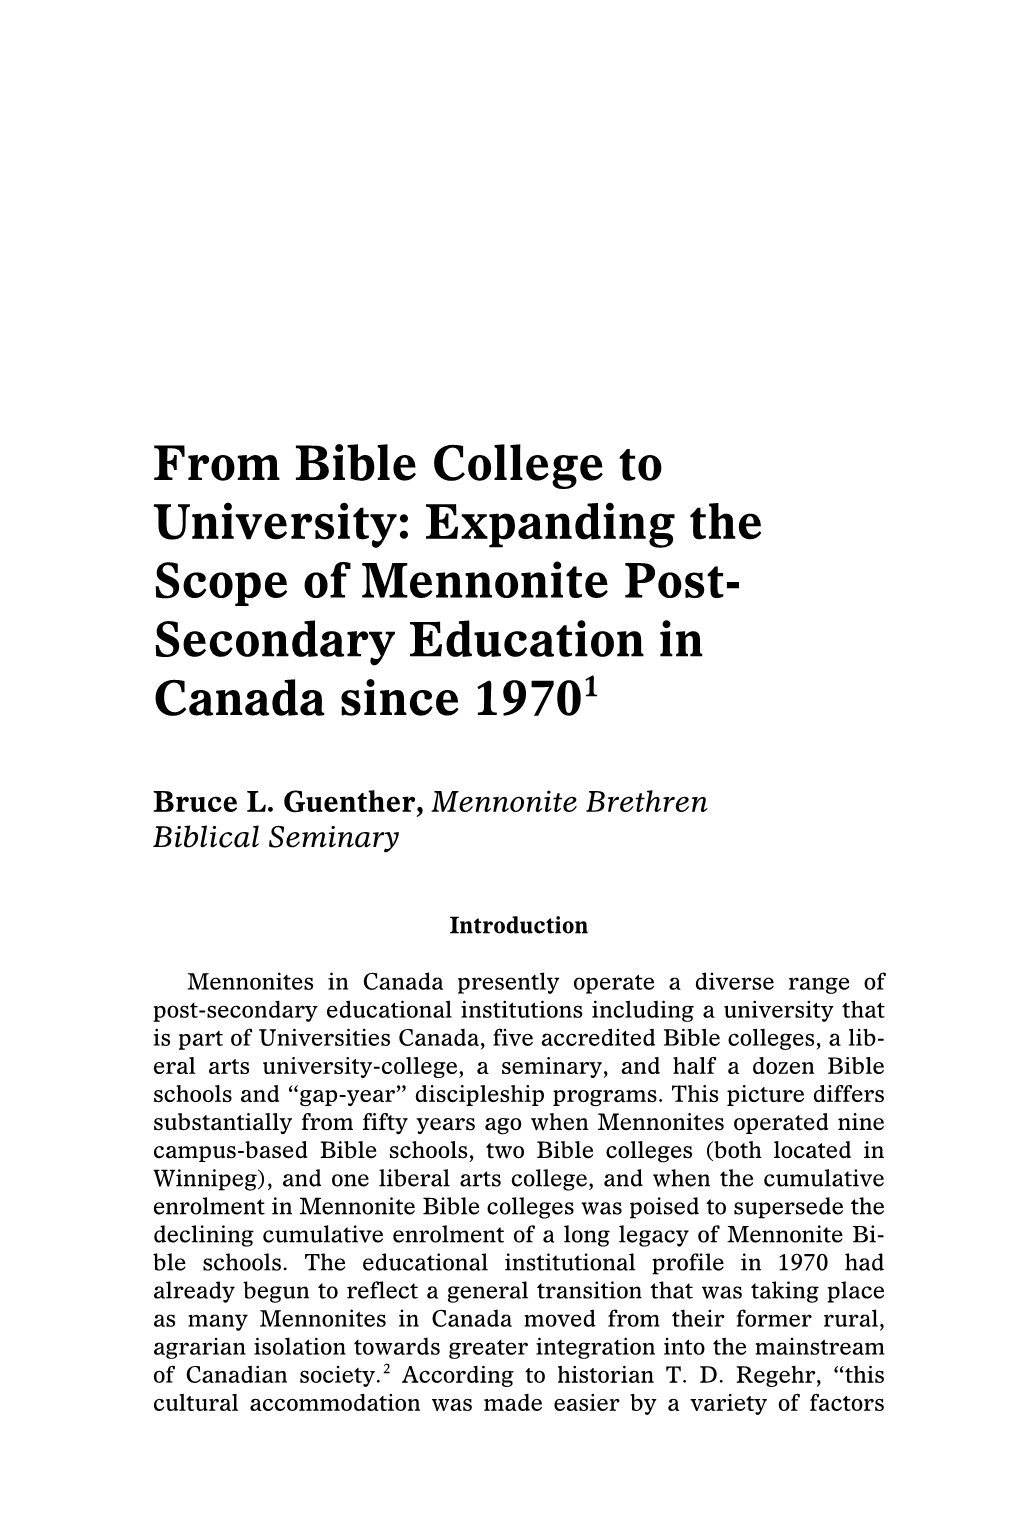 From Bible College to University: Expanding the Scope of Mennonite Post- Secondary Education in Canada Since 19701